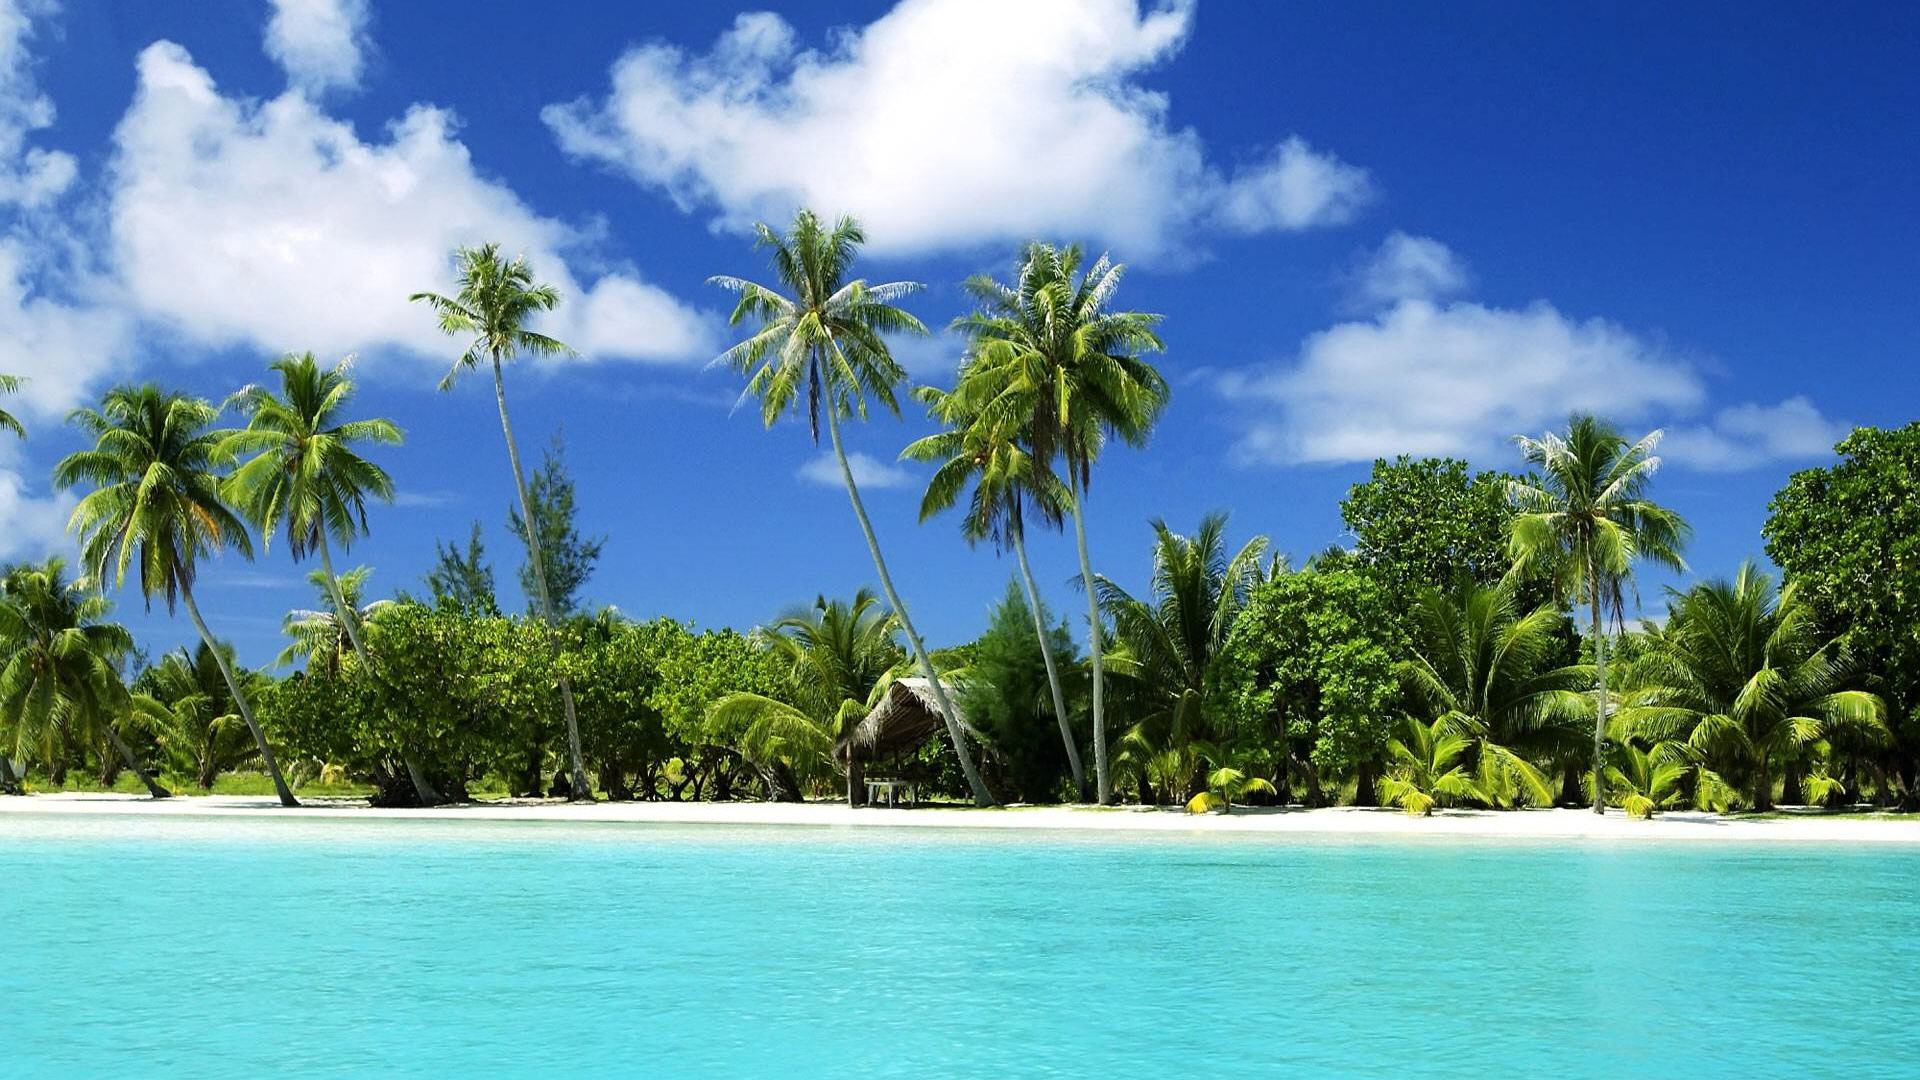 Tropical Wallpaper for Free Super HD Pics download on